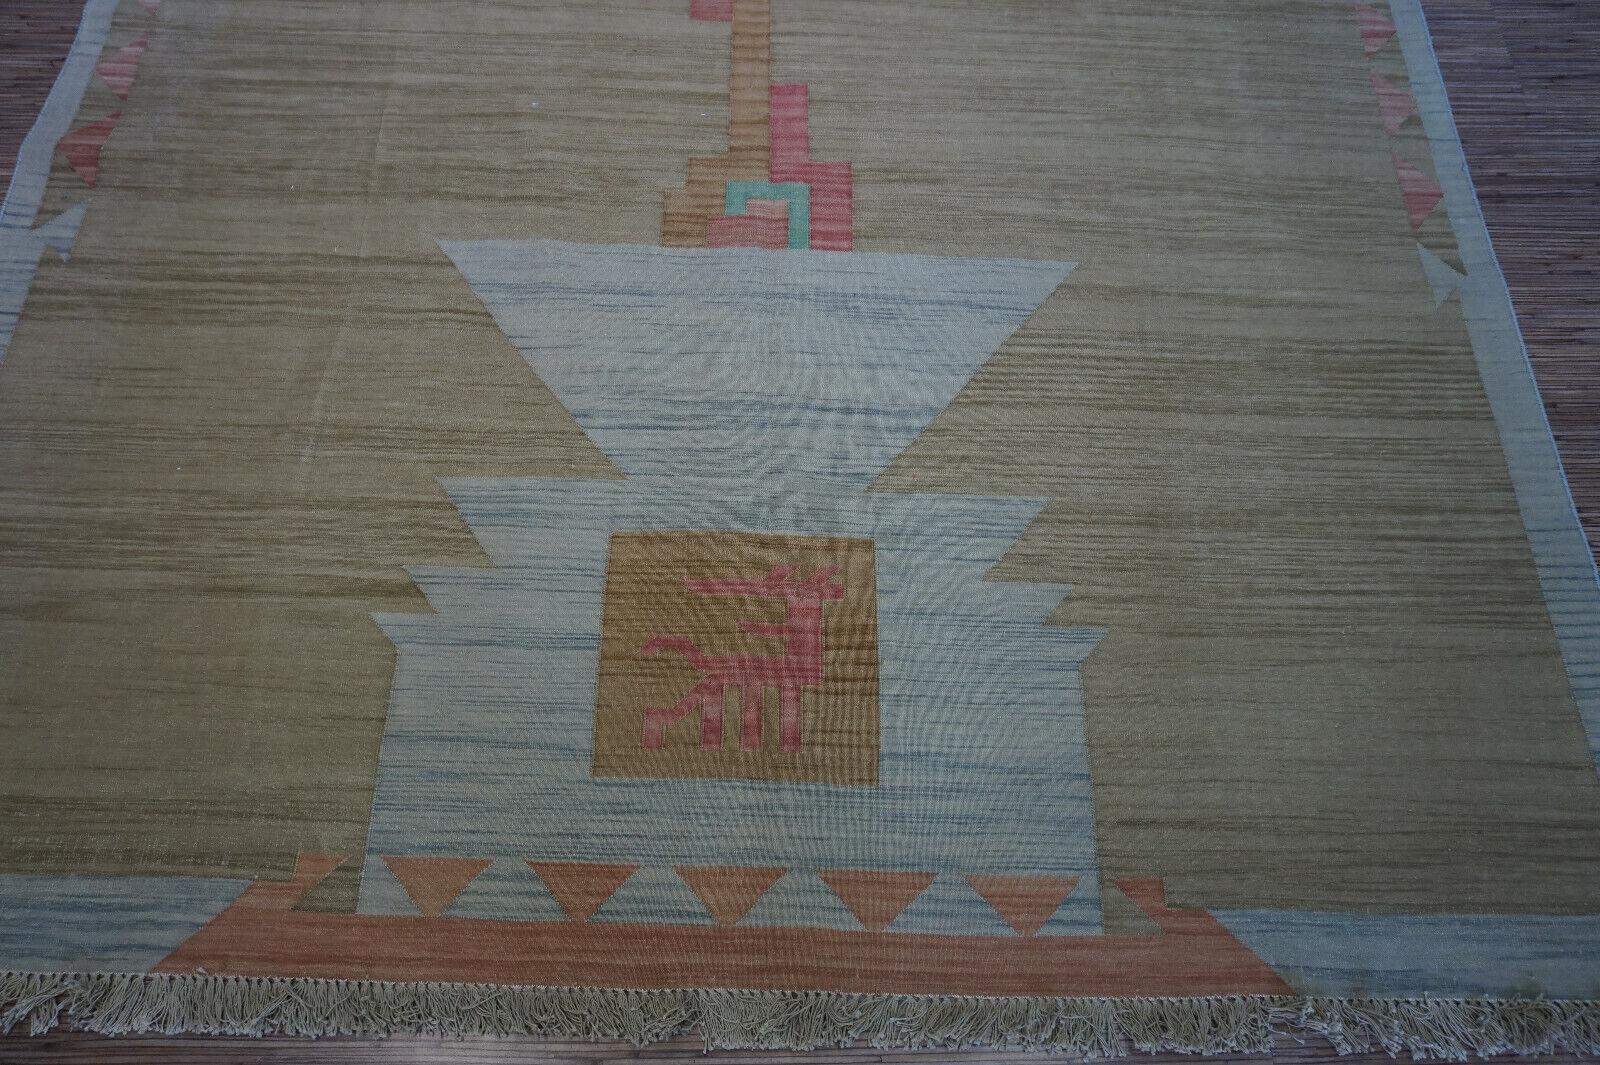 Late 20th Century Handmade Vintage Indian Dhurrie Kilim Rug 6.5' x 8.2', 1970s - 1D45 For Sale